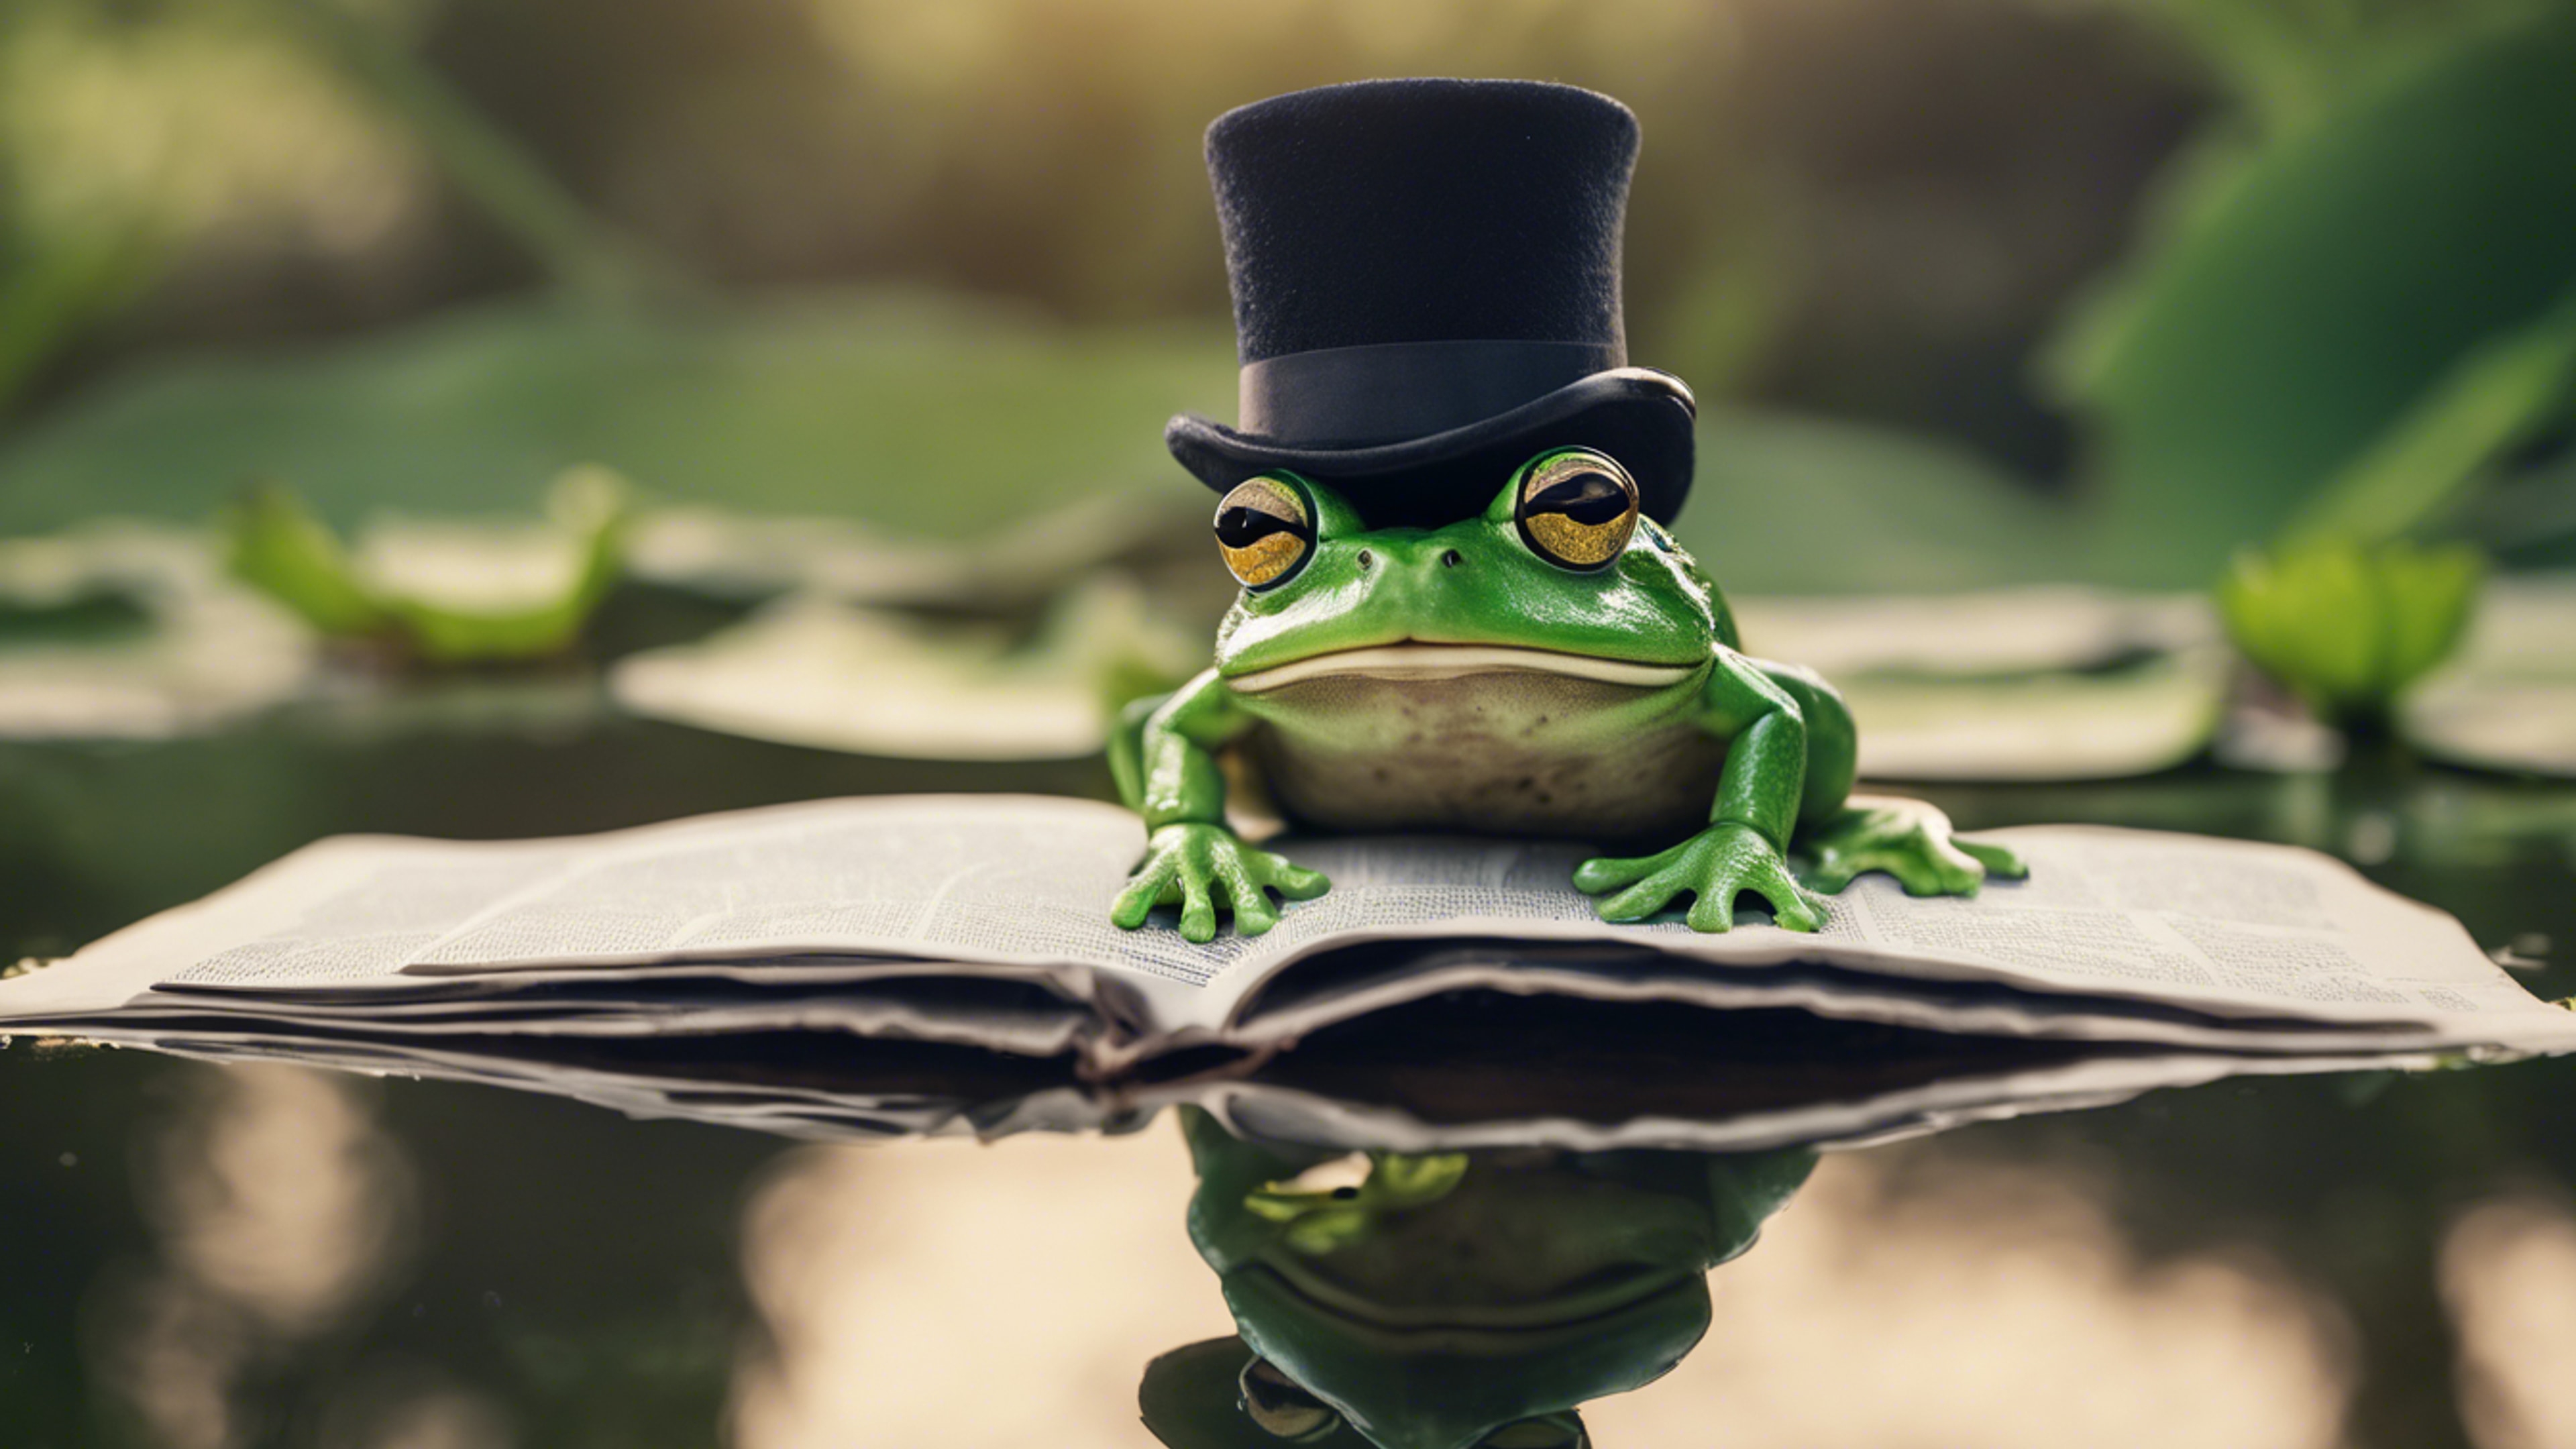 A frog in a top hat and monocle reading a newspaper on a lily pad. ورق الجدران[b0ddd333718f414da74f]